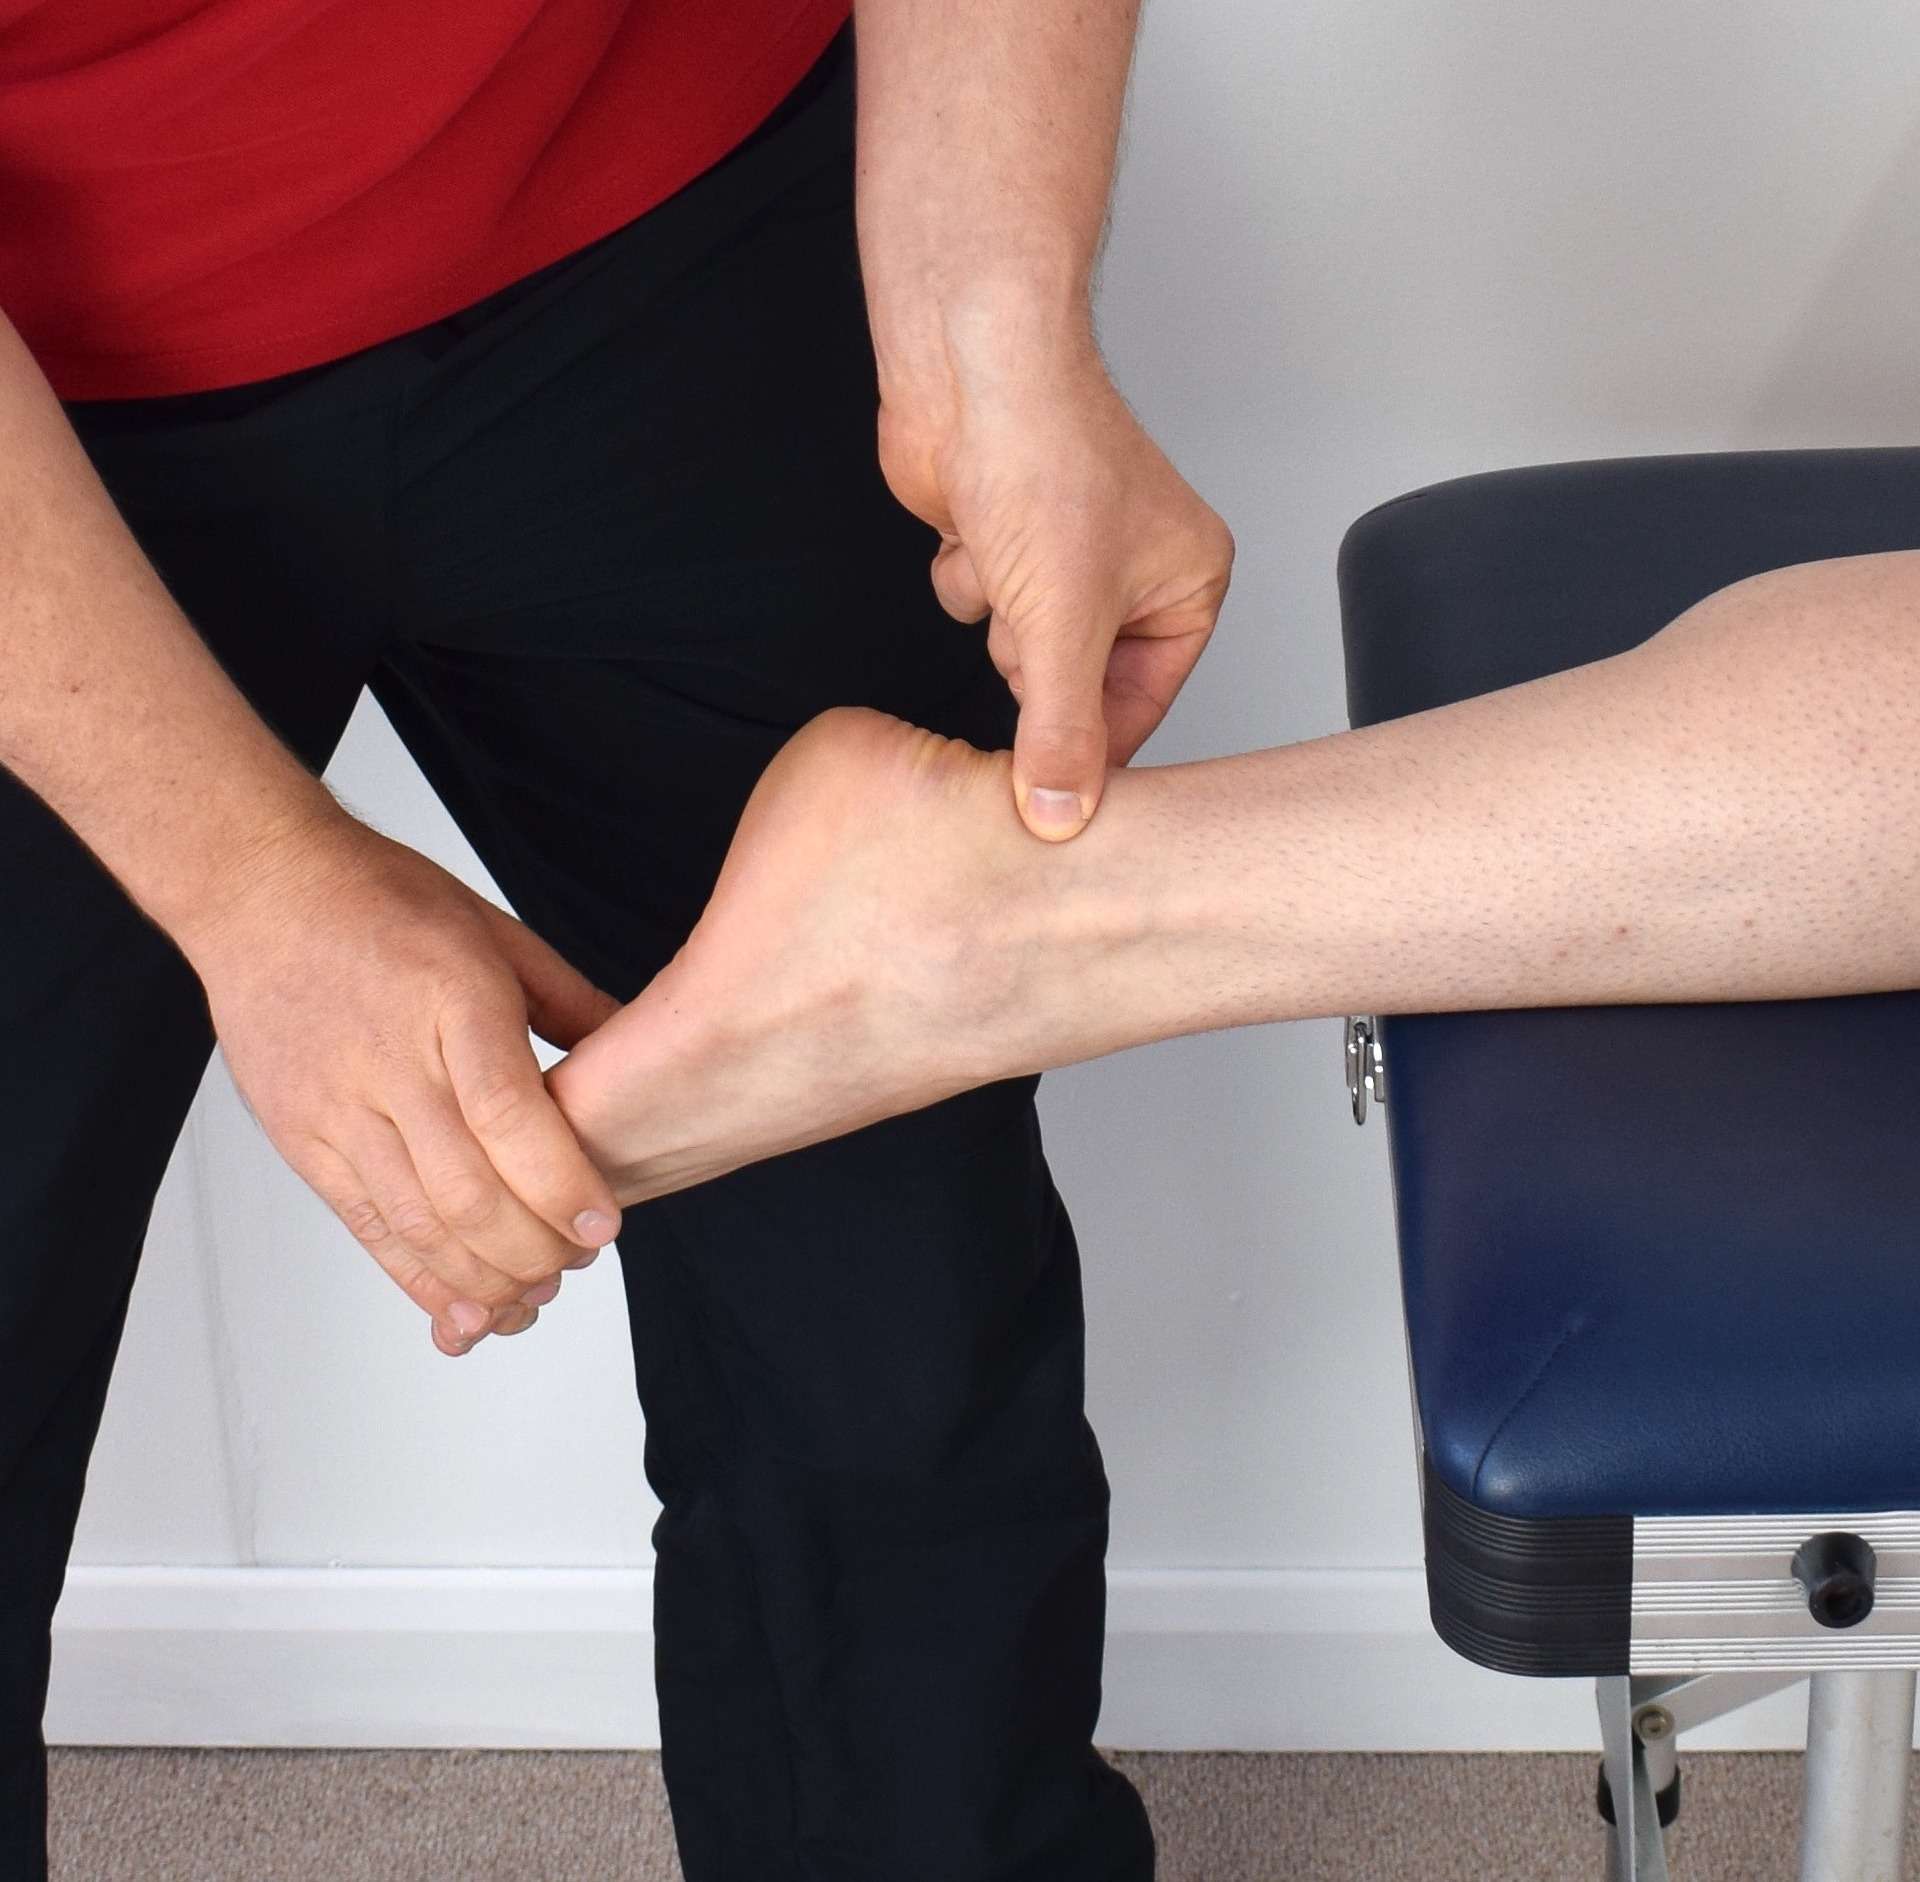 physio assessment ankle injury rehab